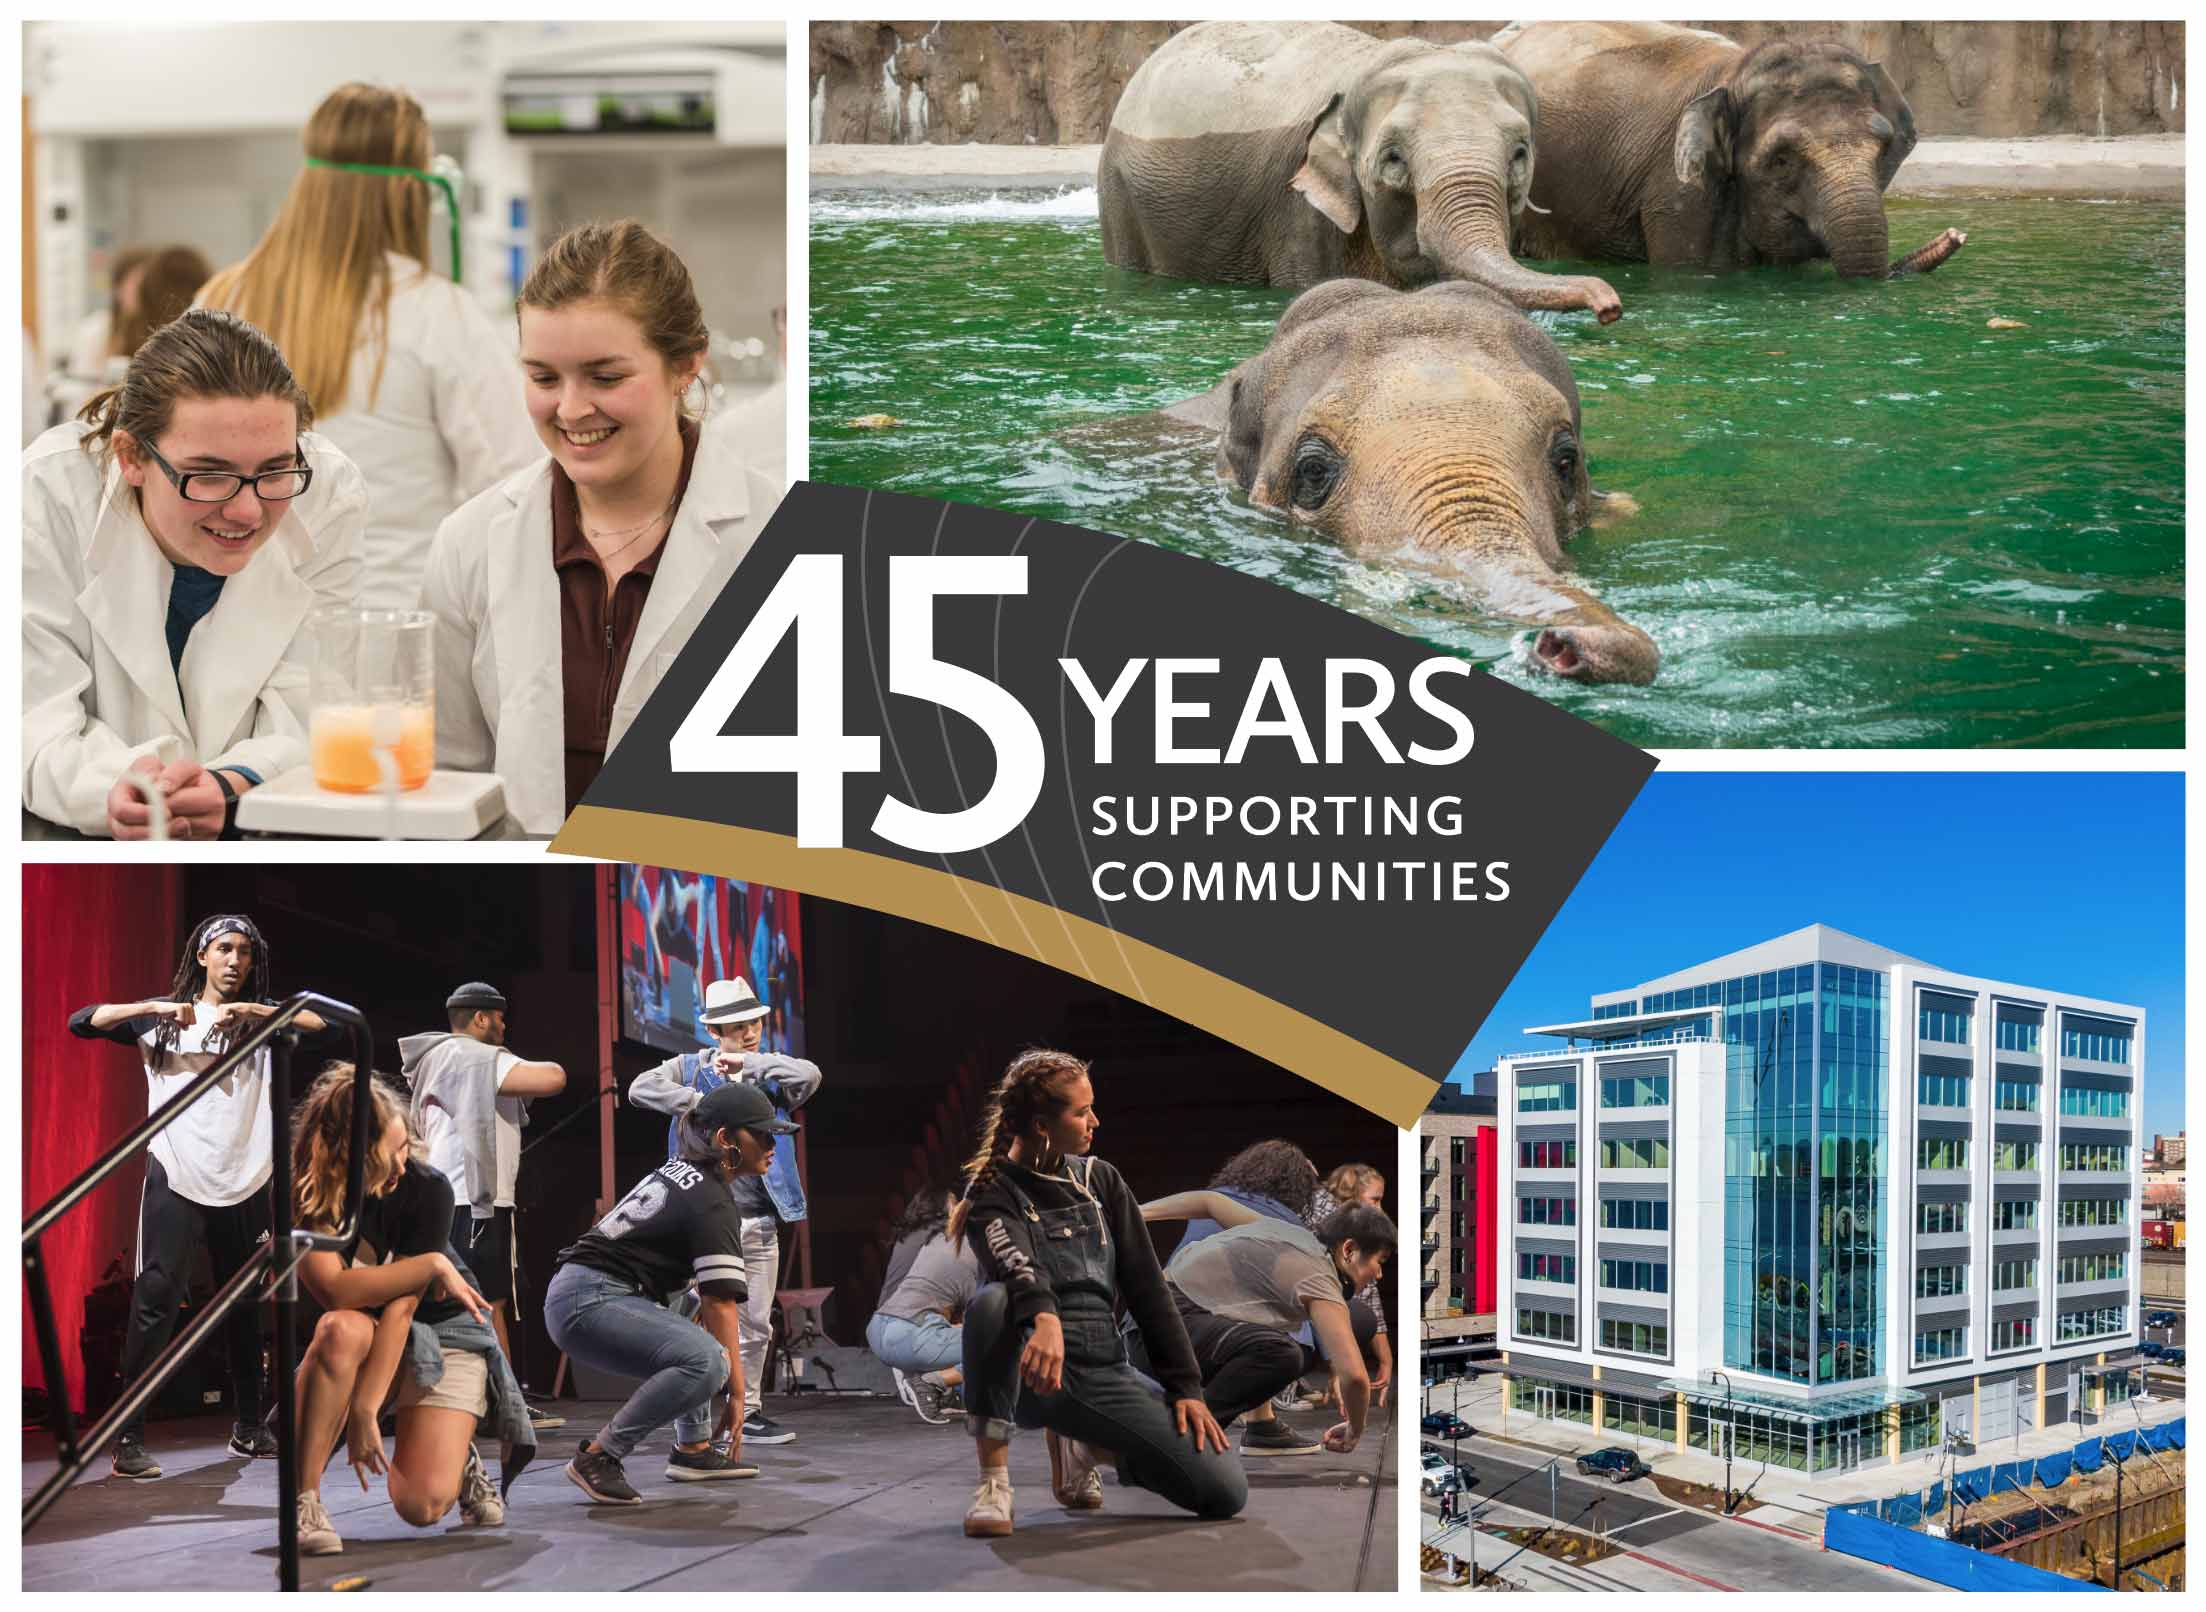 Text that says "45 Years Supporting Community" with images of two female scientists, a group of performers on a stage, three elephants swimming in water, and a new building. 